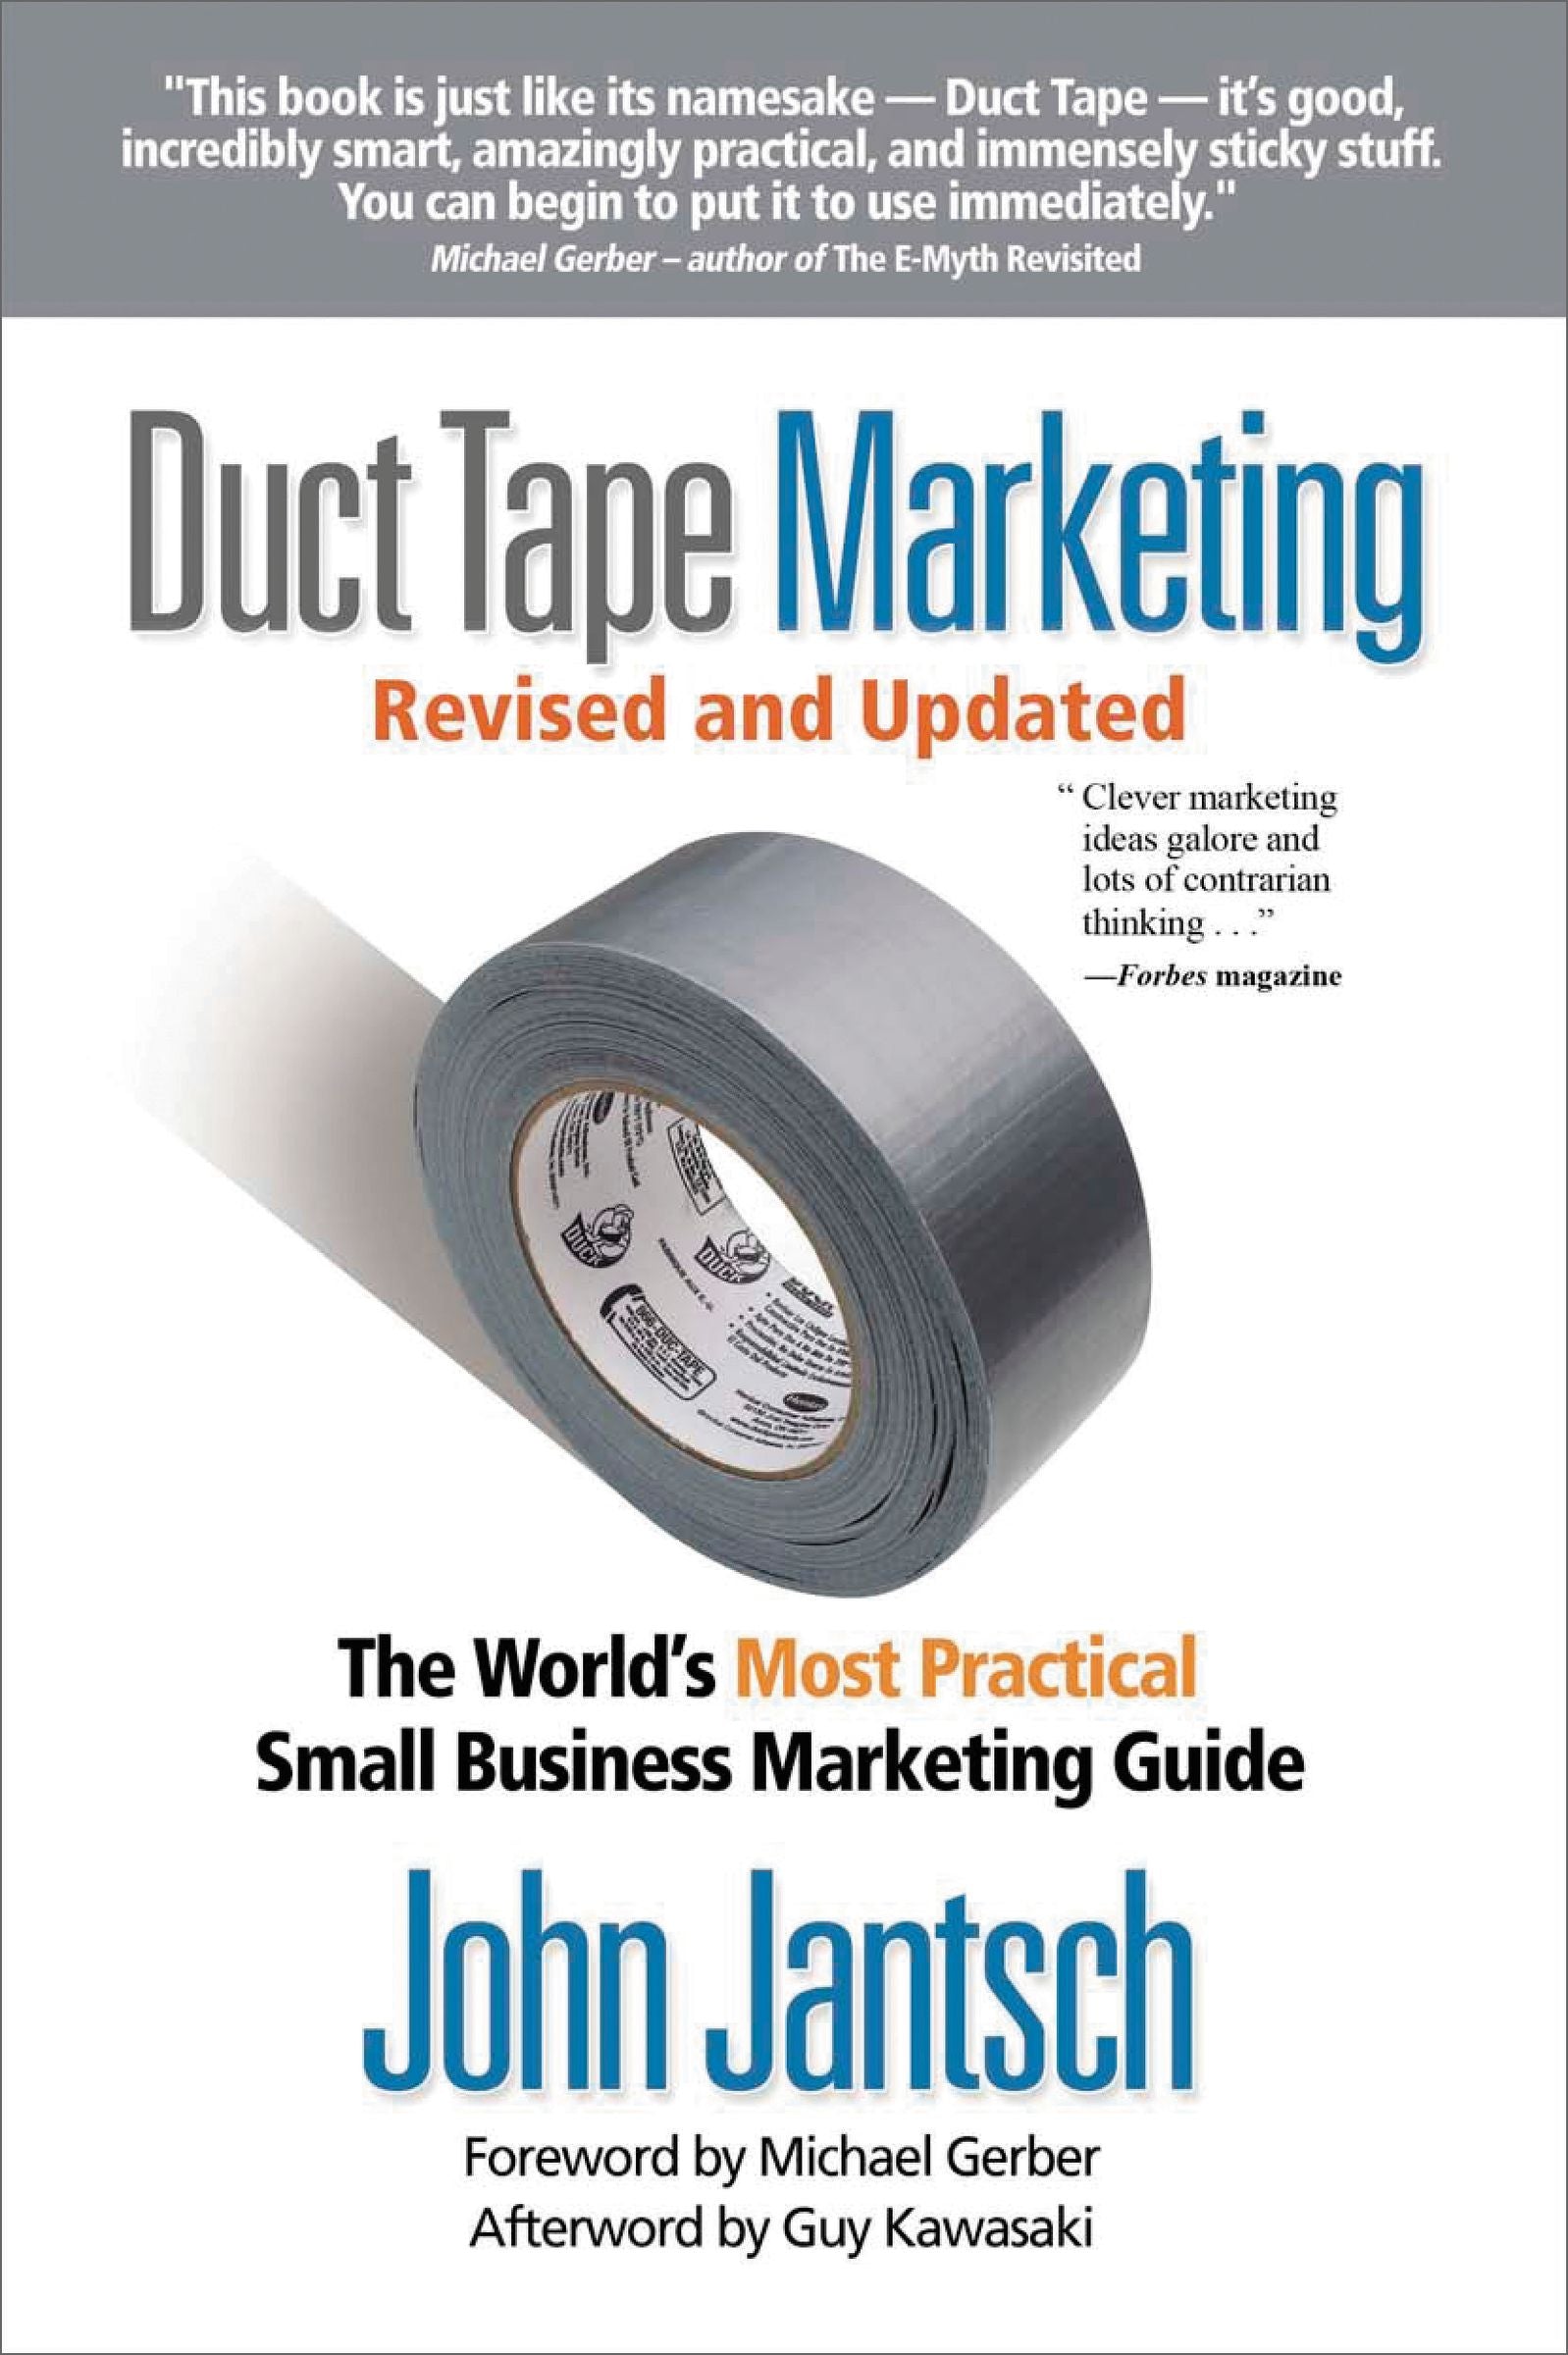 Image of Duct Tape Marketing other